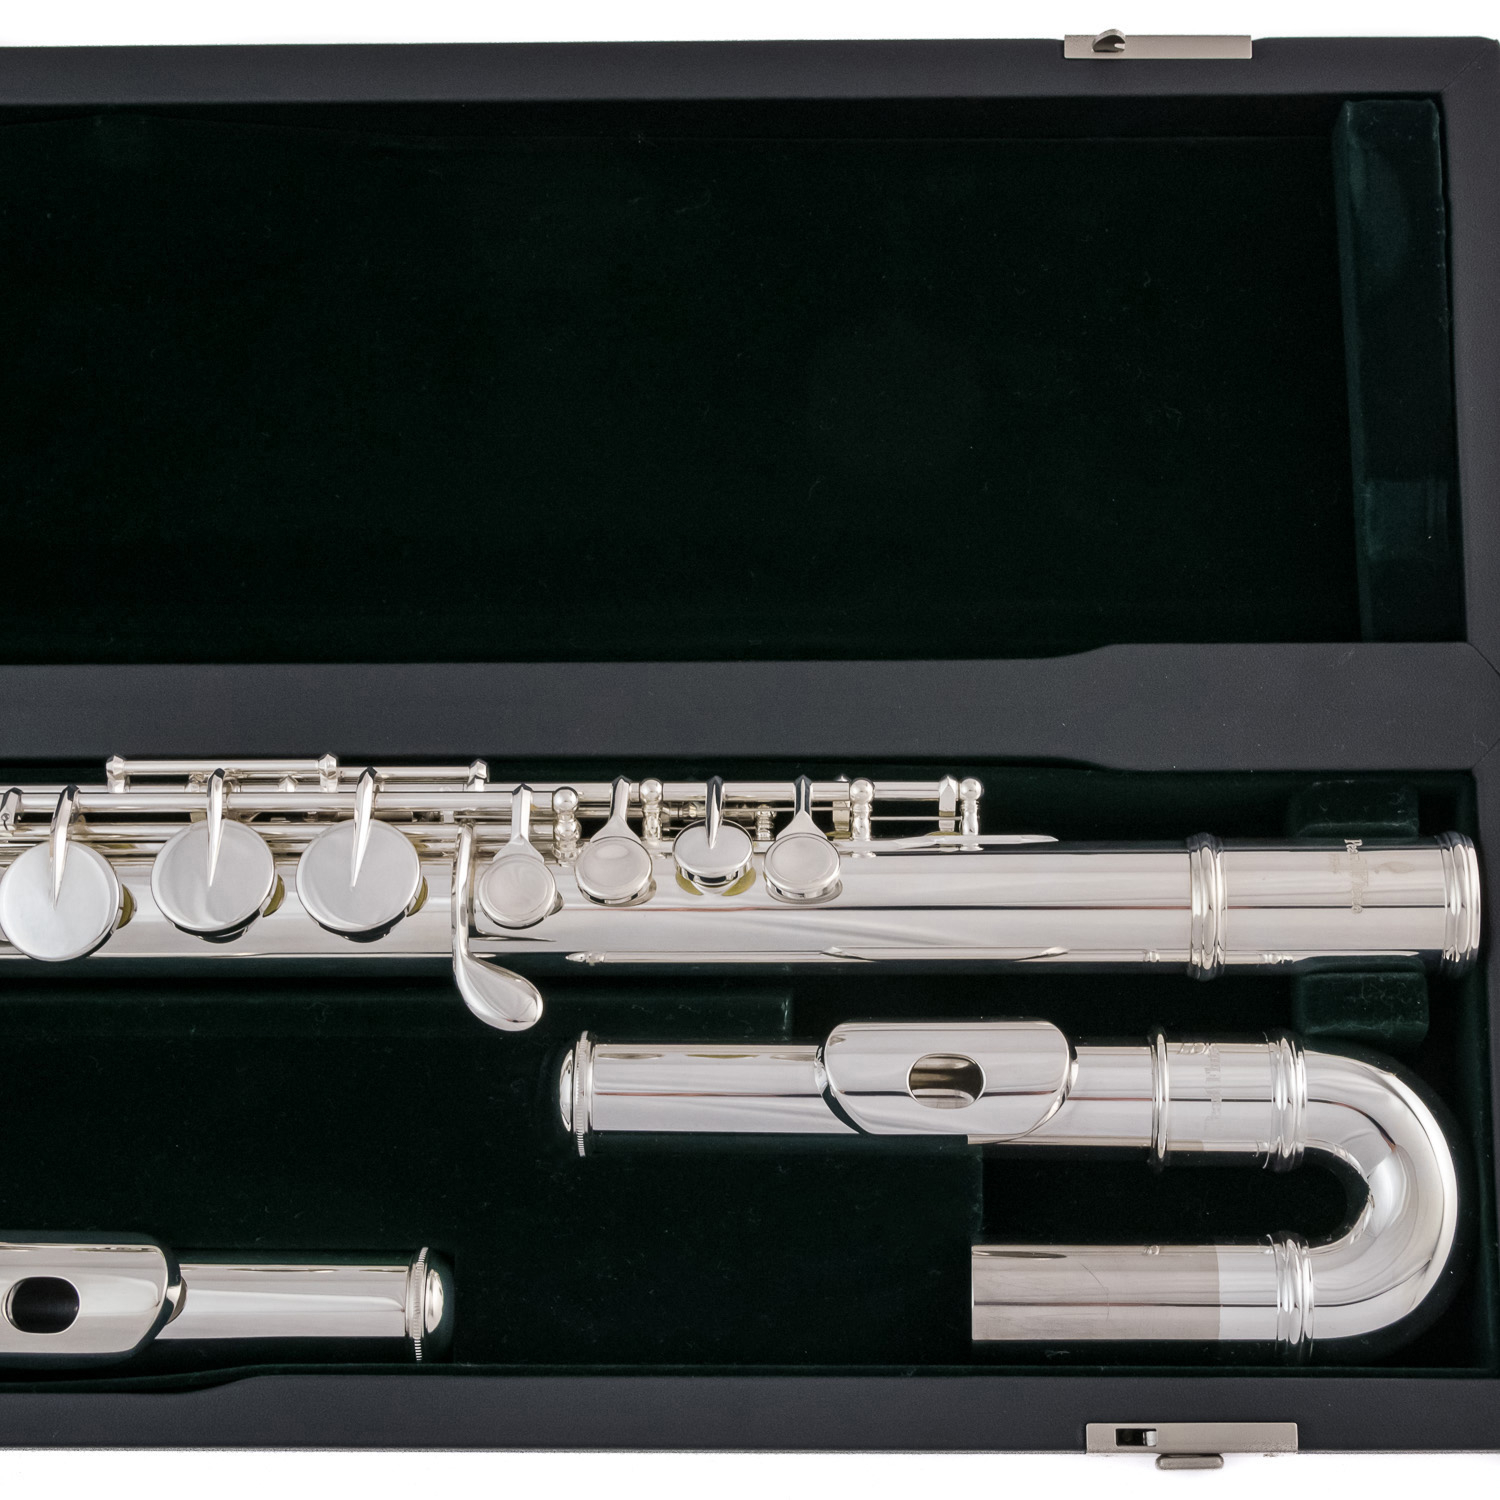 Pearl Alto Flute - 207 ESU w/Straight and Curved Head Joint